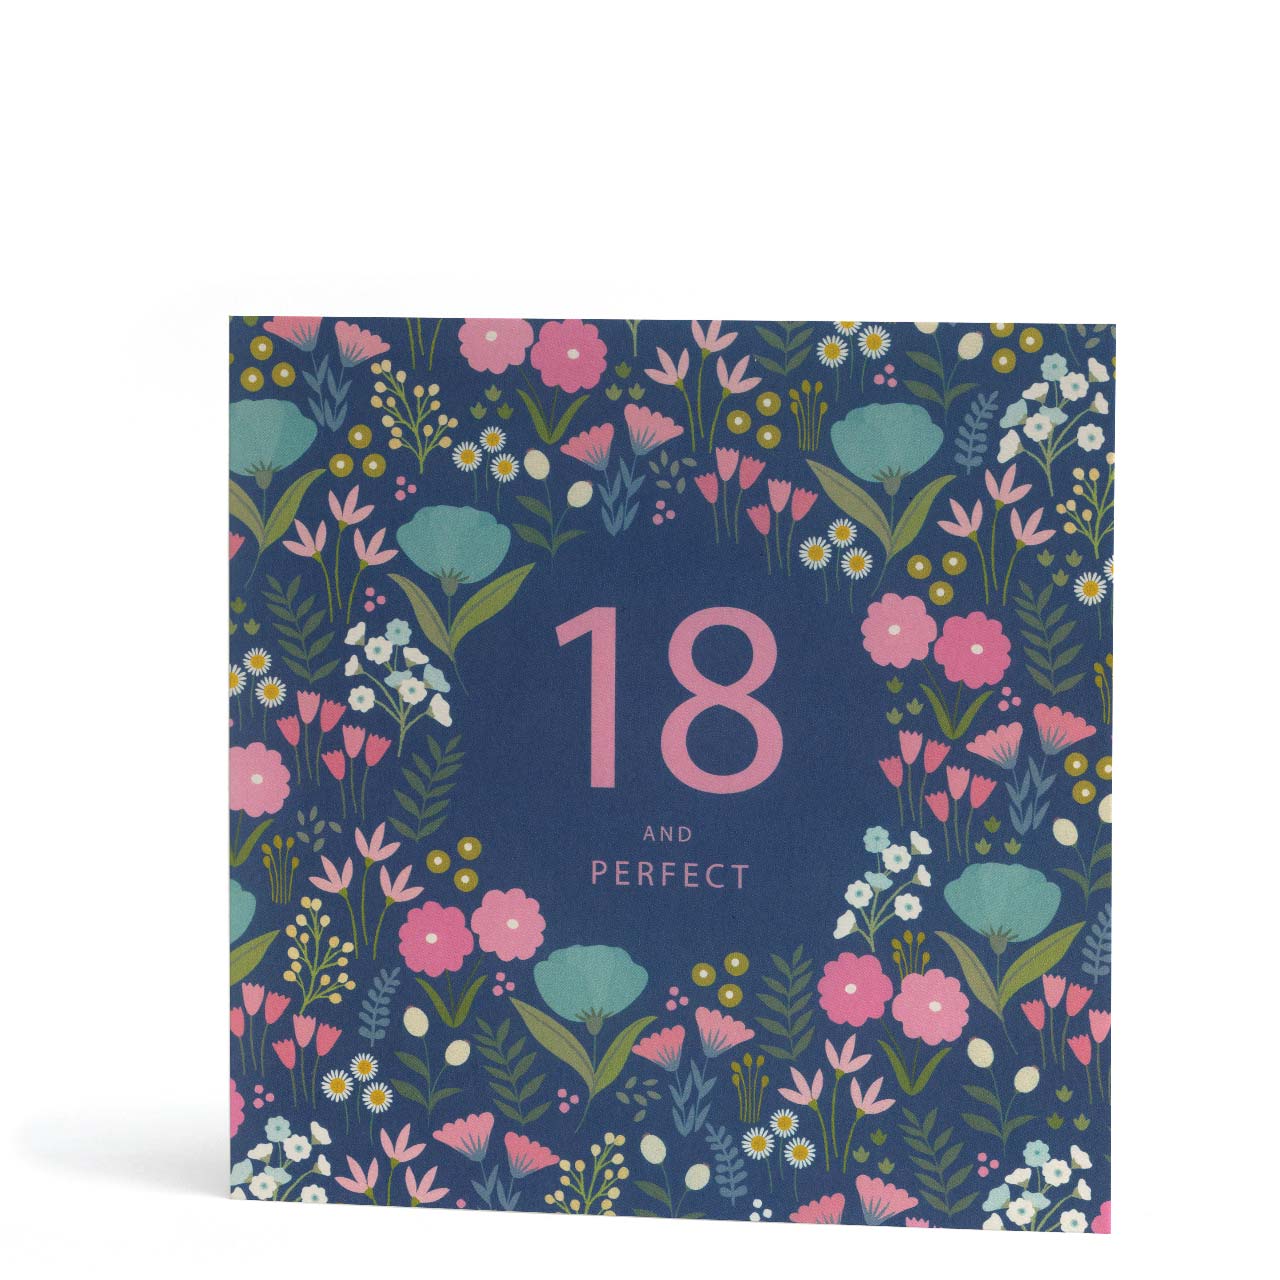 18 and Perfect Floral Birthday Card